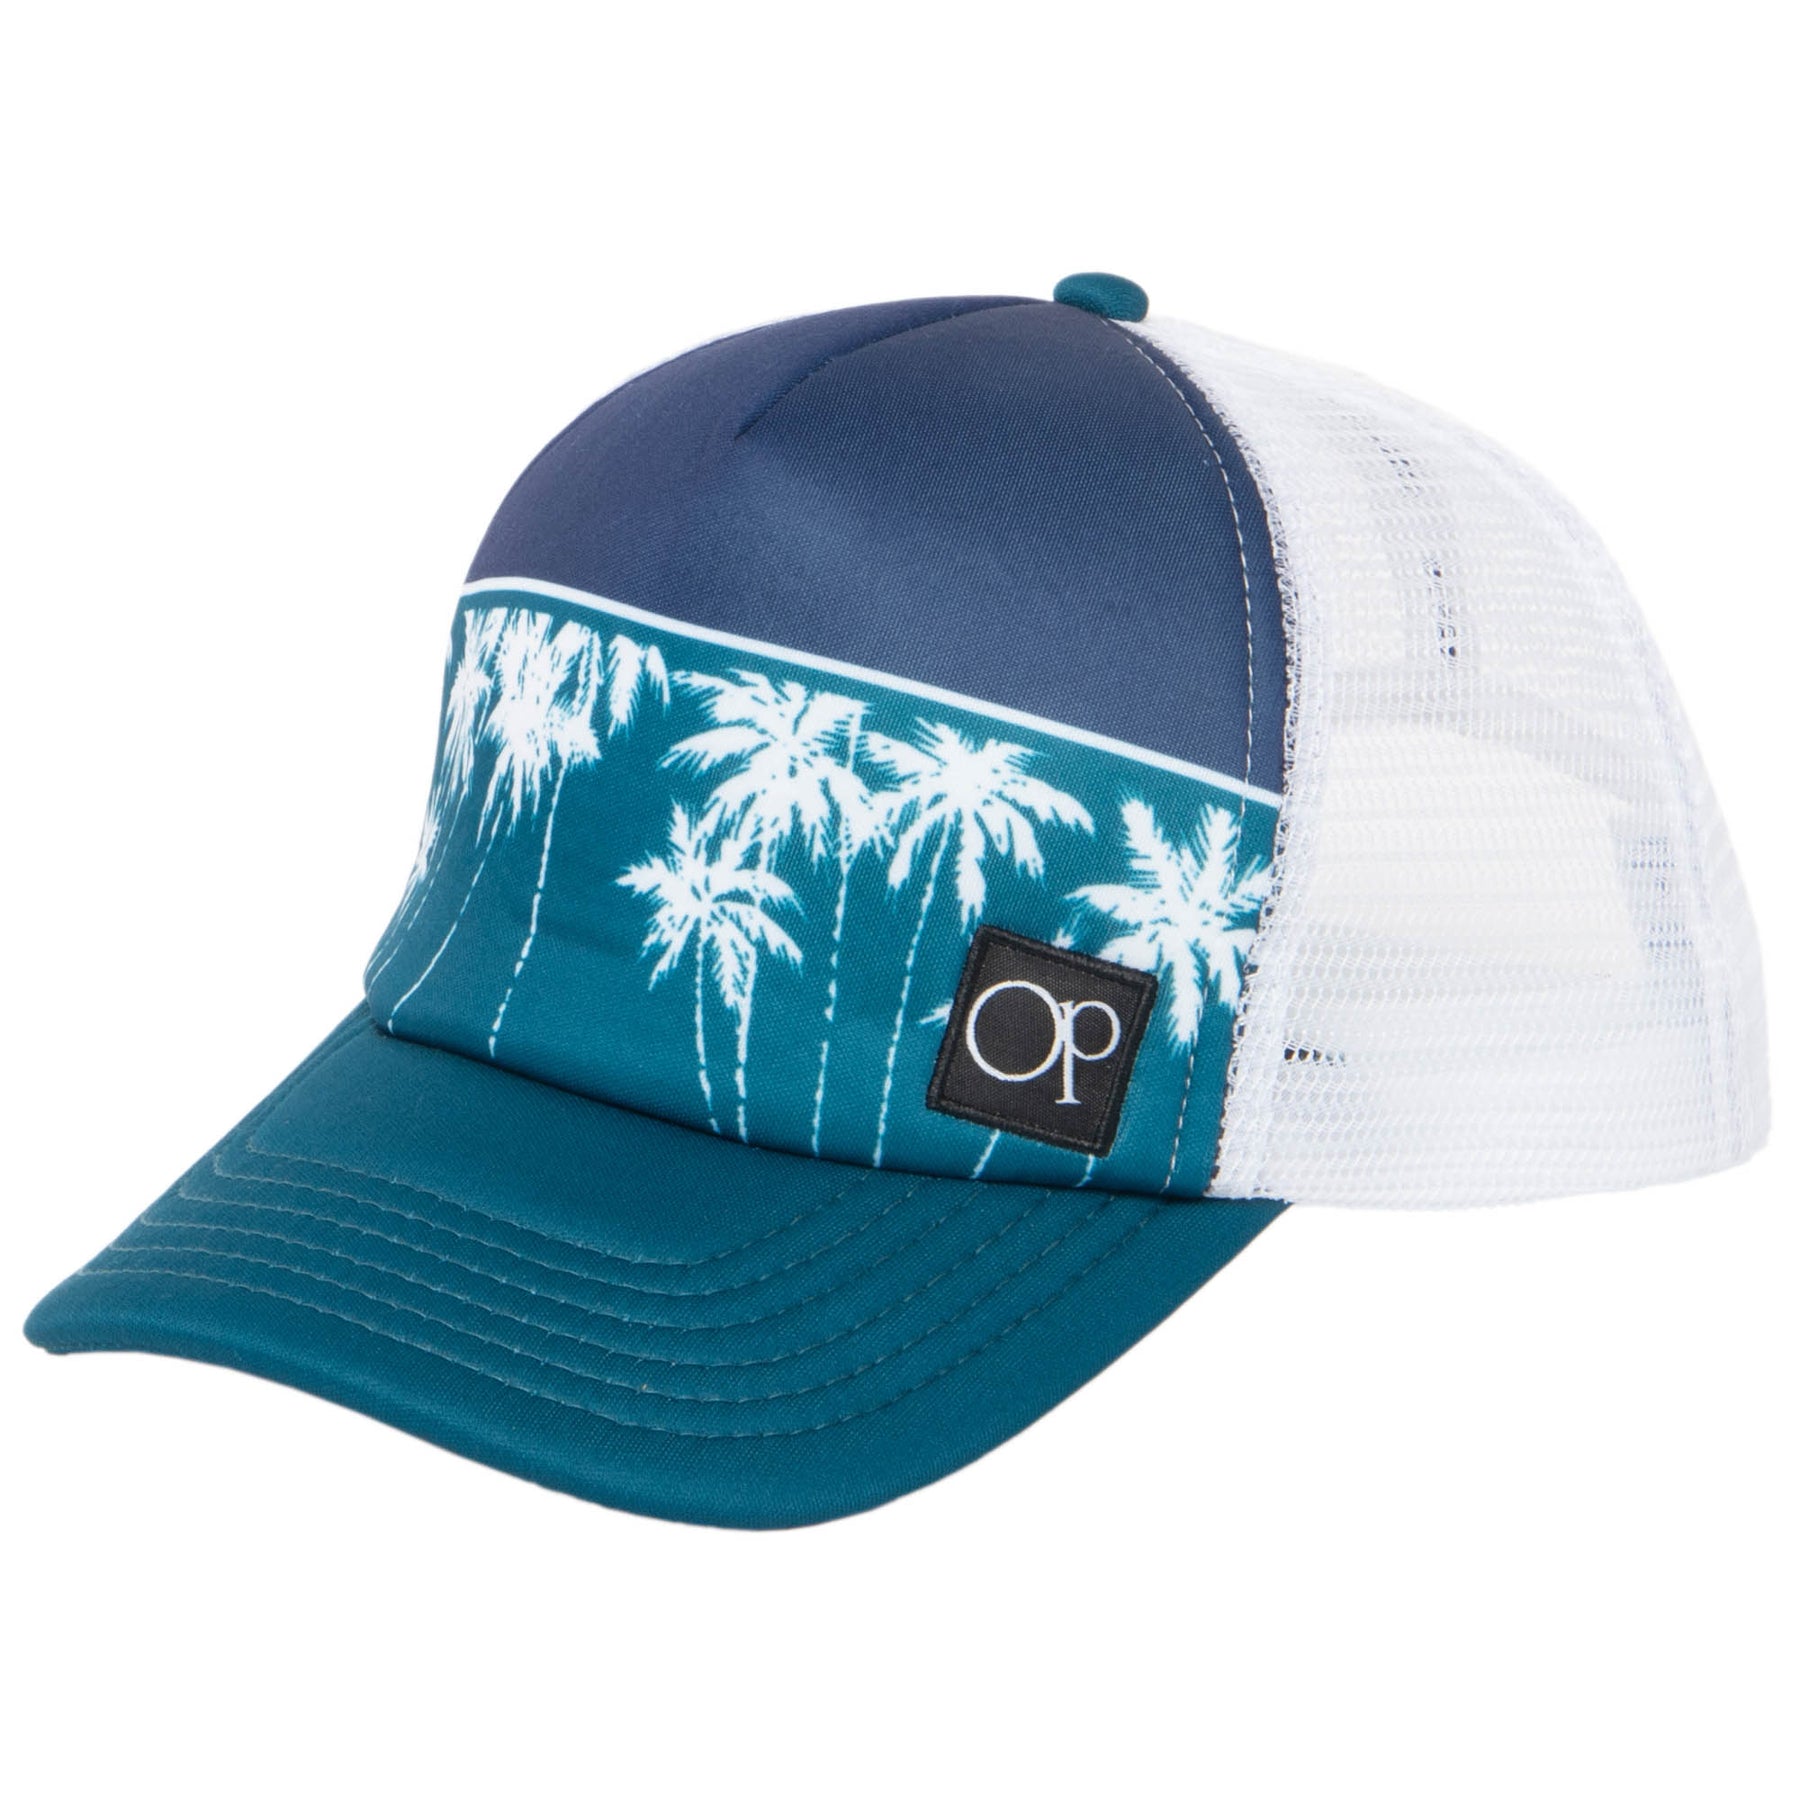 Ocean Pacific - 5 Panel Trucker Hat with White Palm Tree Print